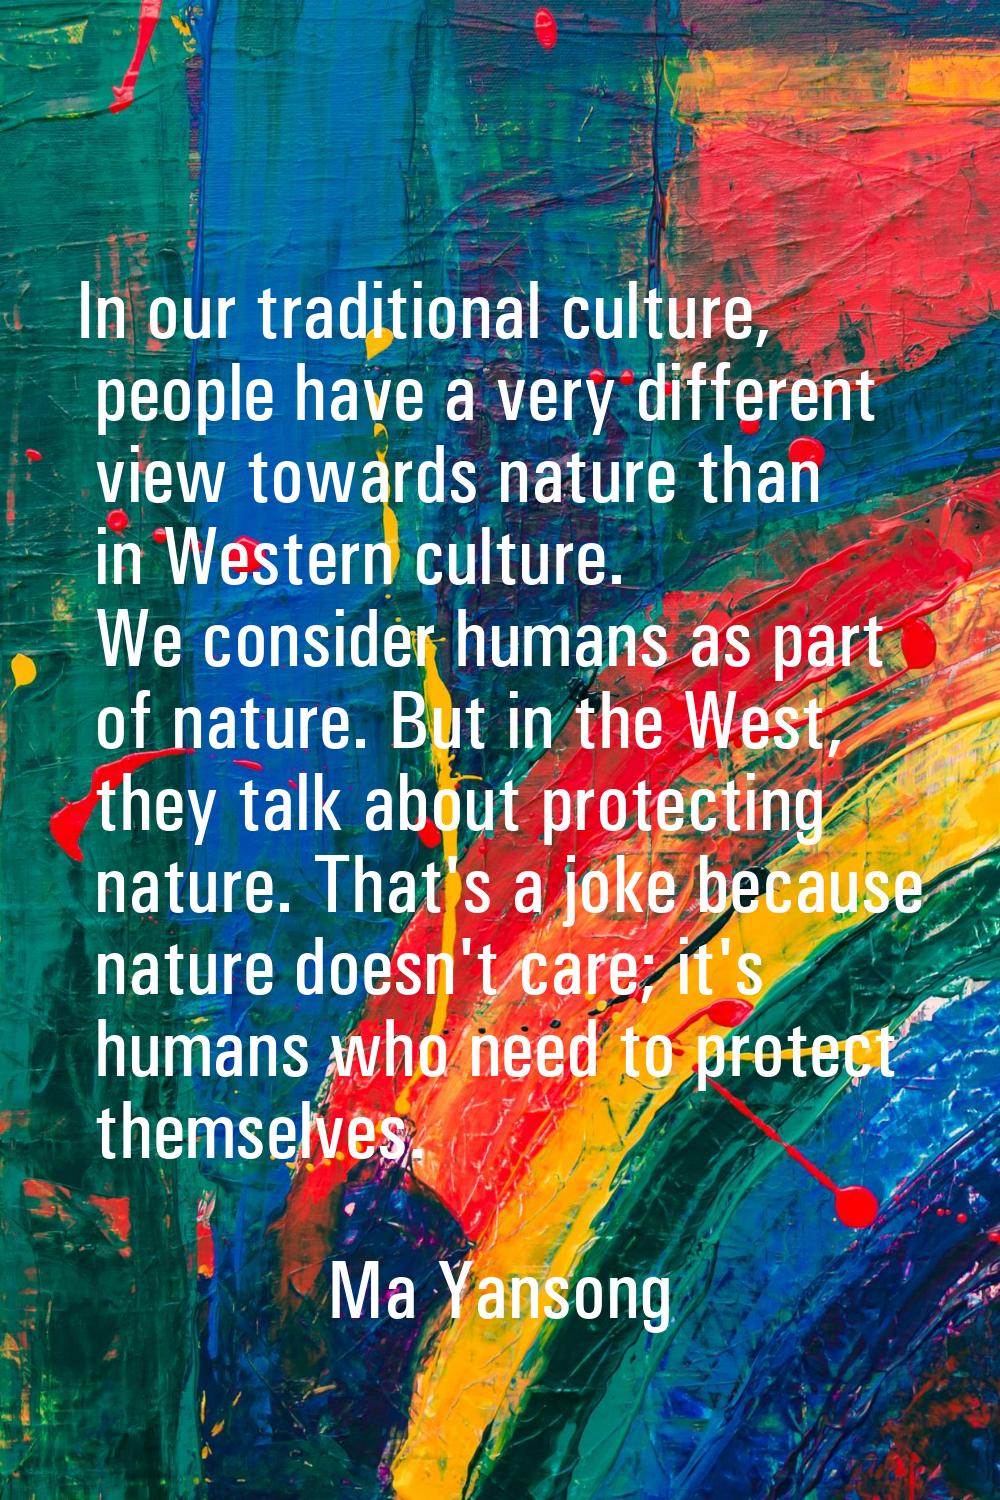 In our traditional culture, people have a very different view towards nature than in Western cultur